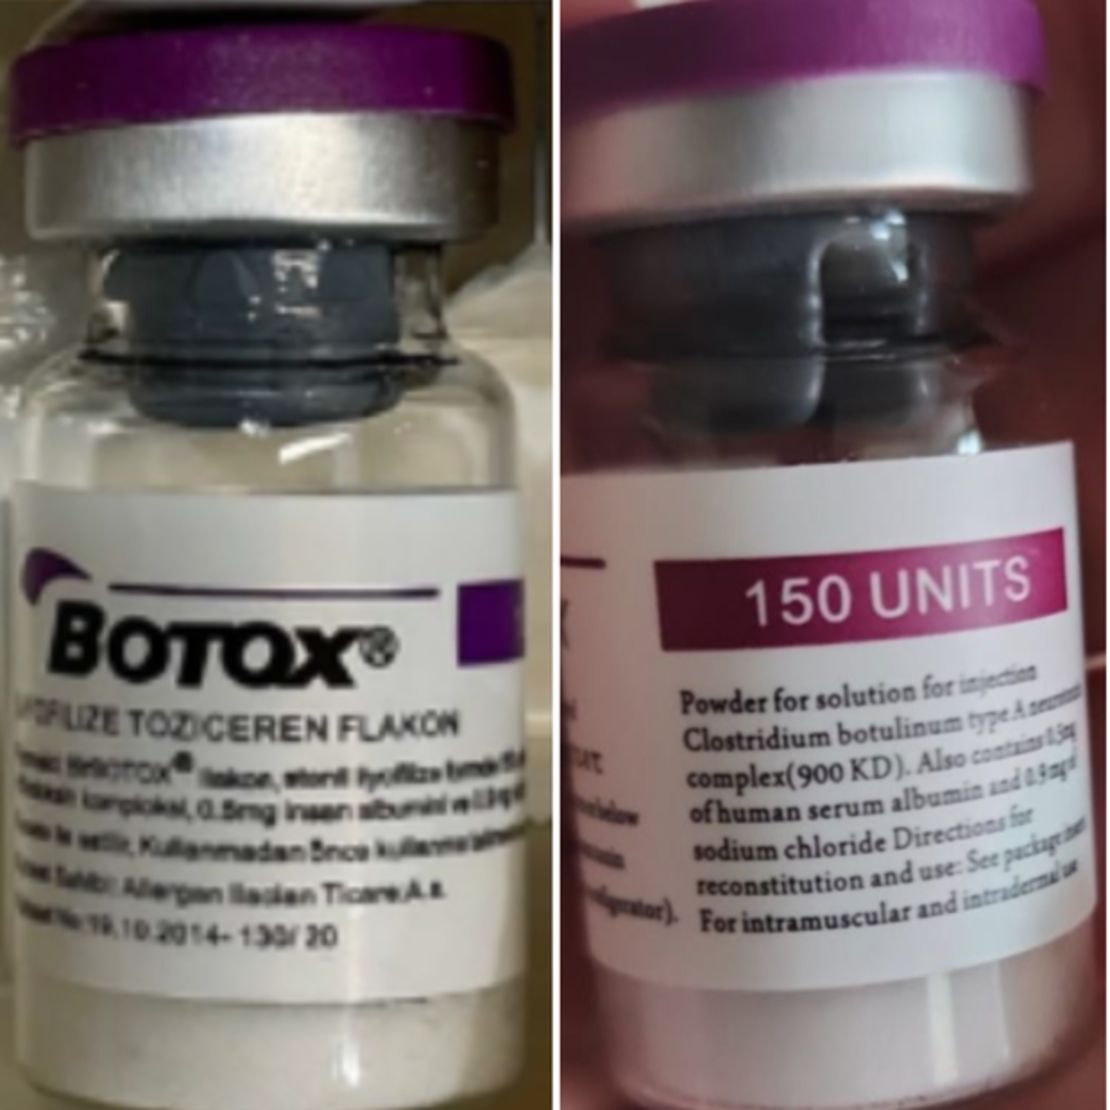 Consumers should report suspected Botox products to the FDA at 800-551-3989, the agency said.